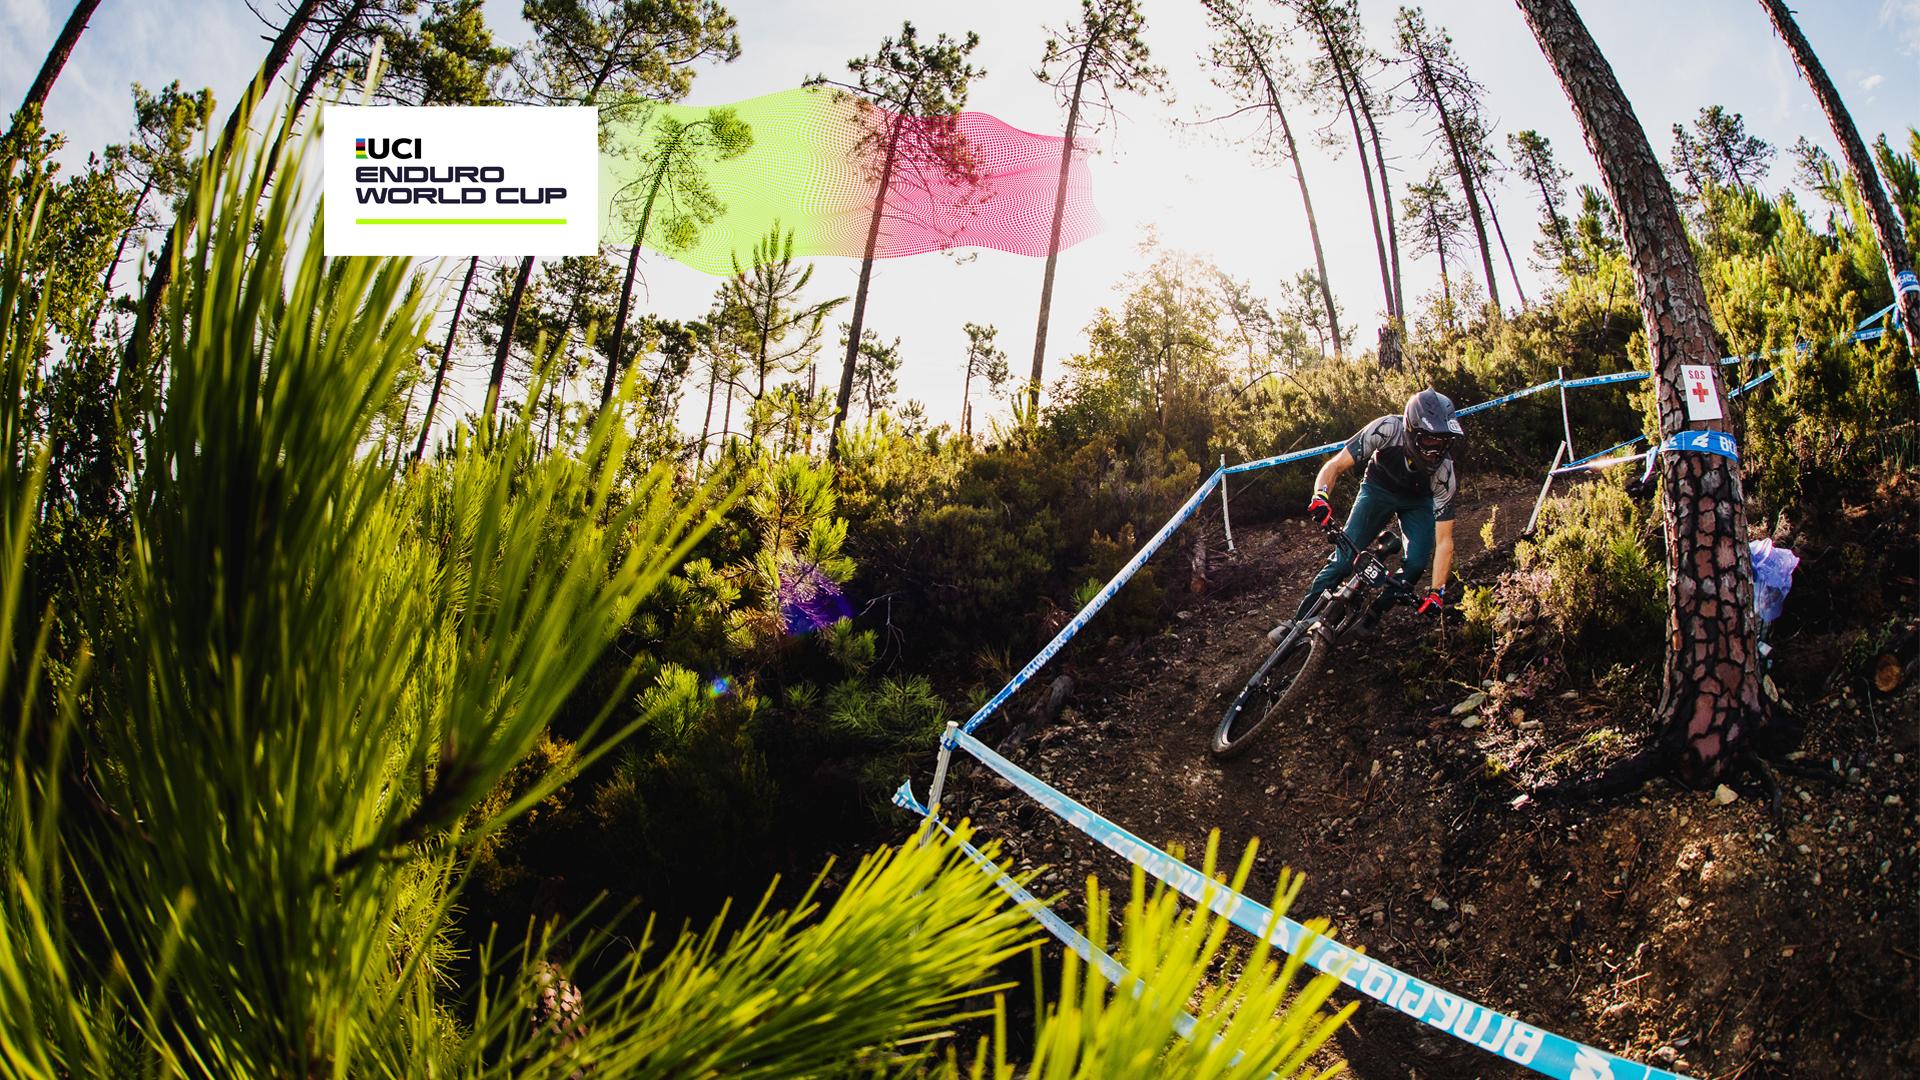 The Uci Mountain Bike World Series arrives in Liguria from June 1st to 4th